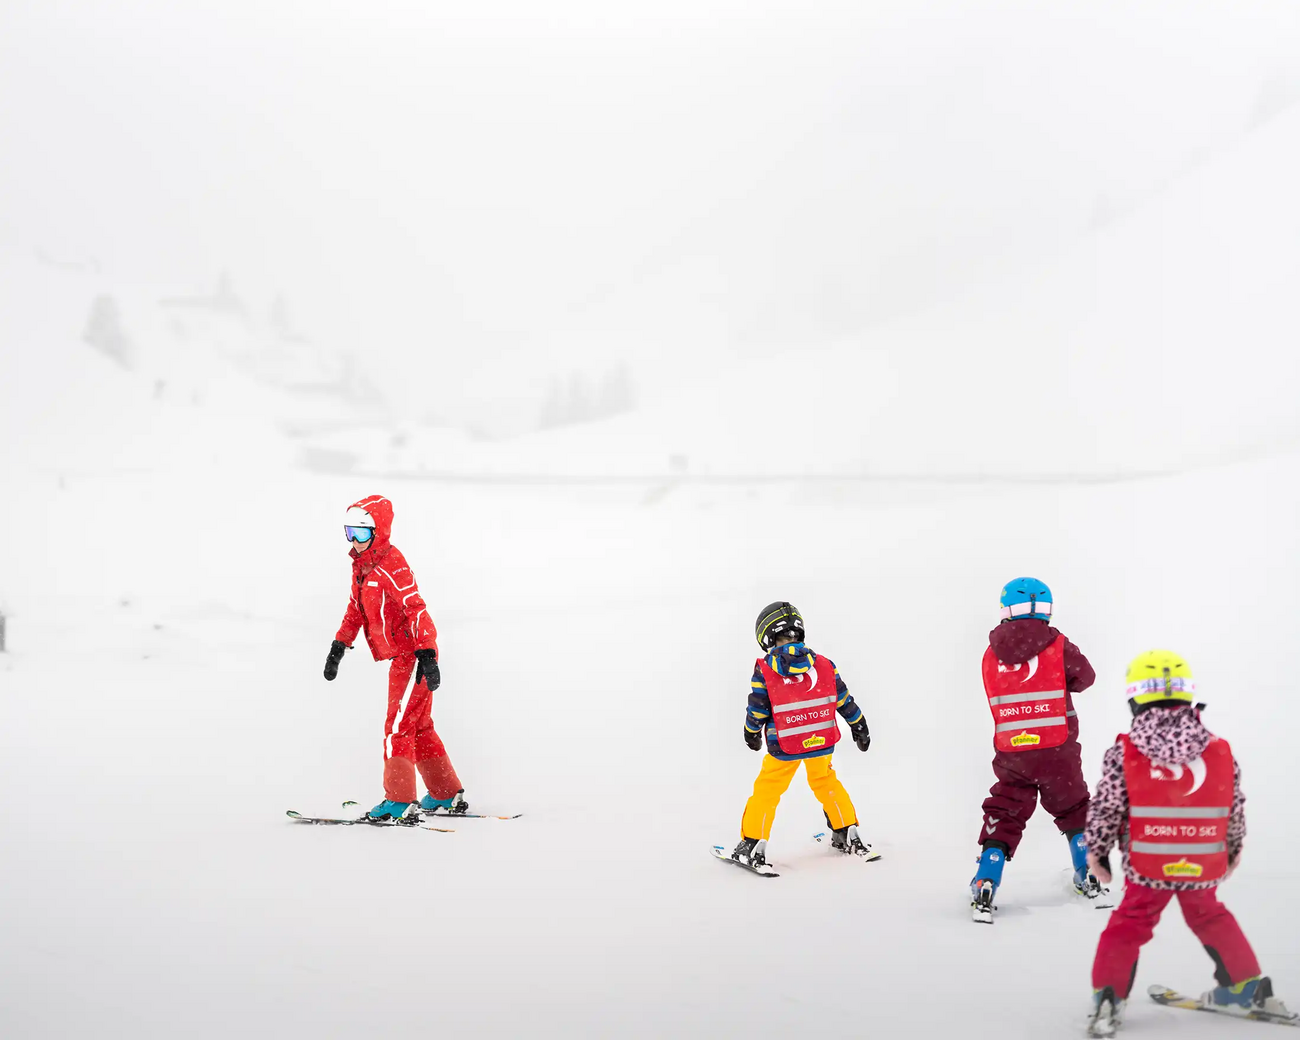 Three children are following their ski instructor in the kids’ ski course